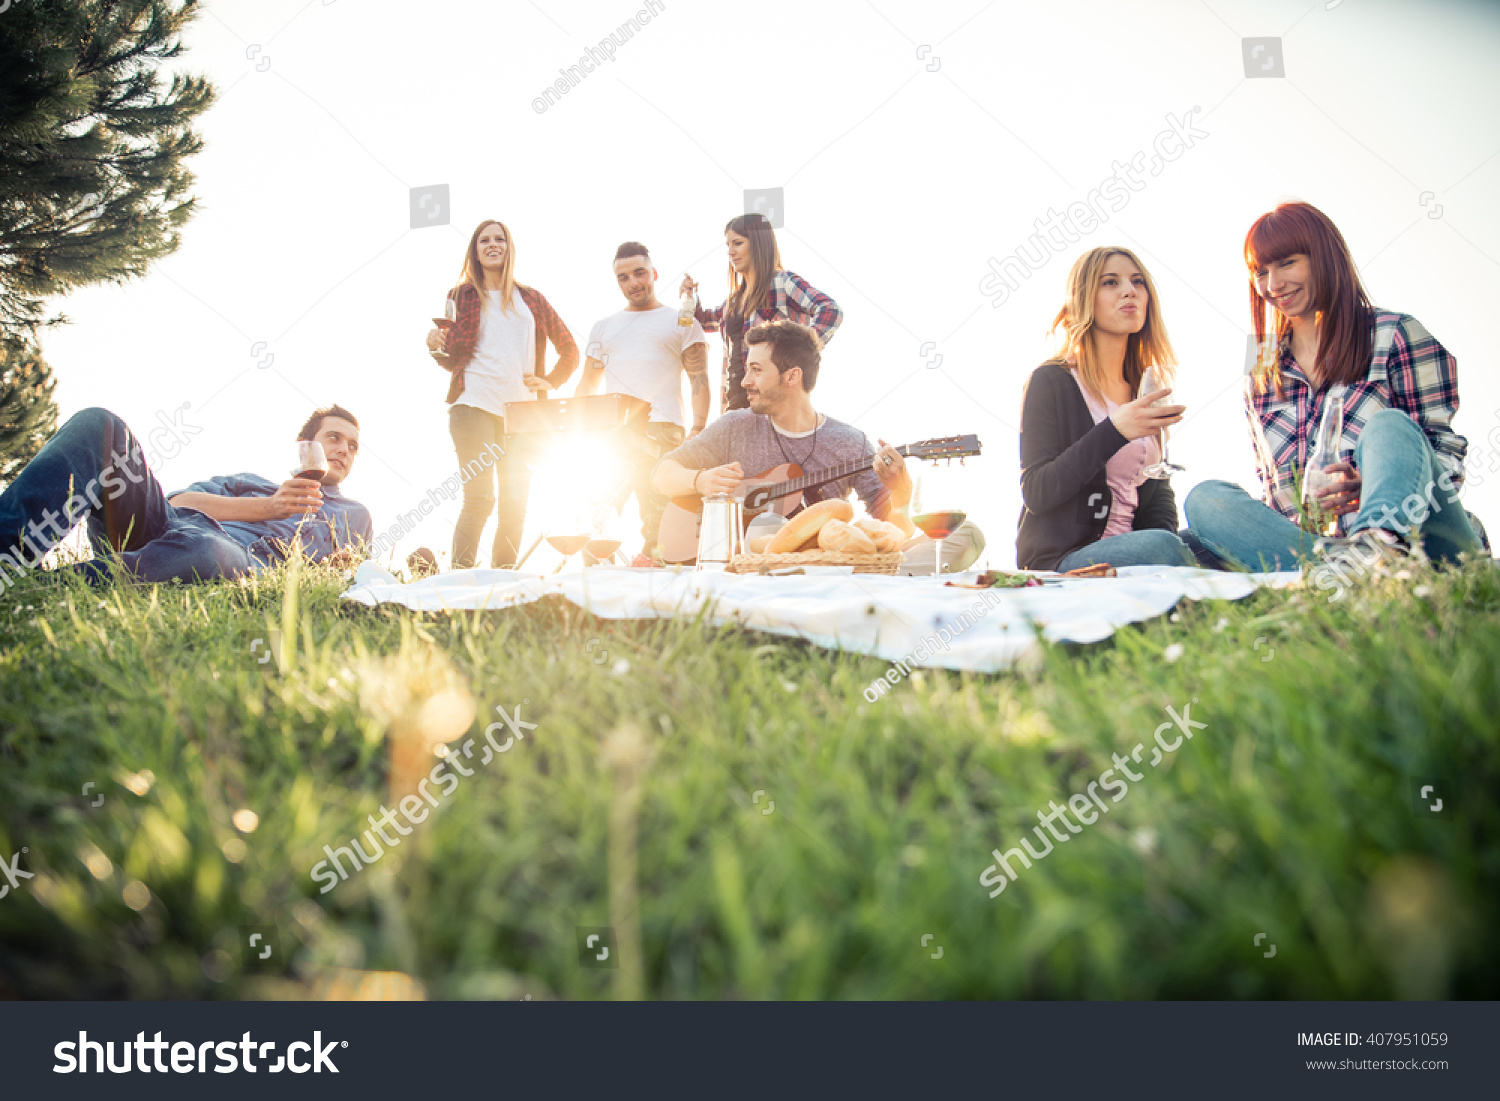 Group of friends having pic-nic in a park on a sunny day - People hanging out, having fun while grilling and relaxing #407951059